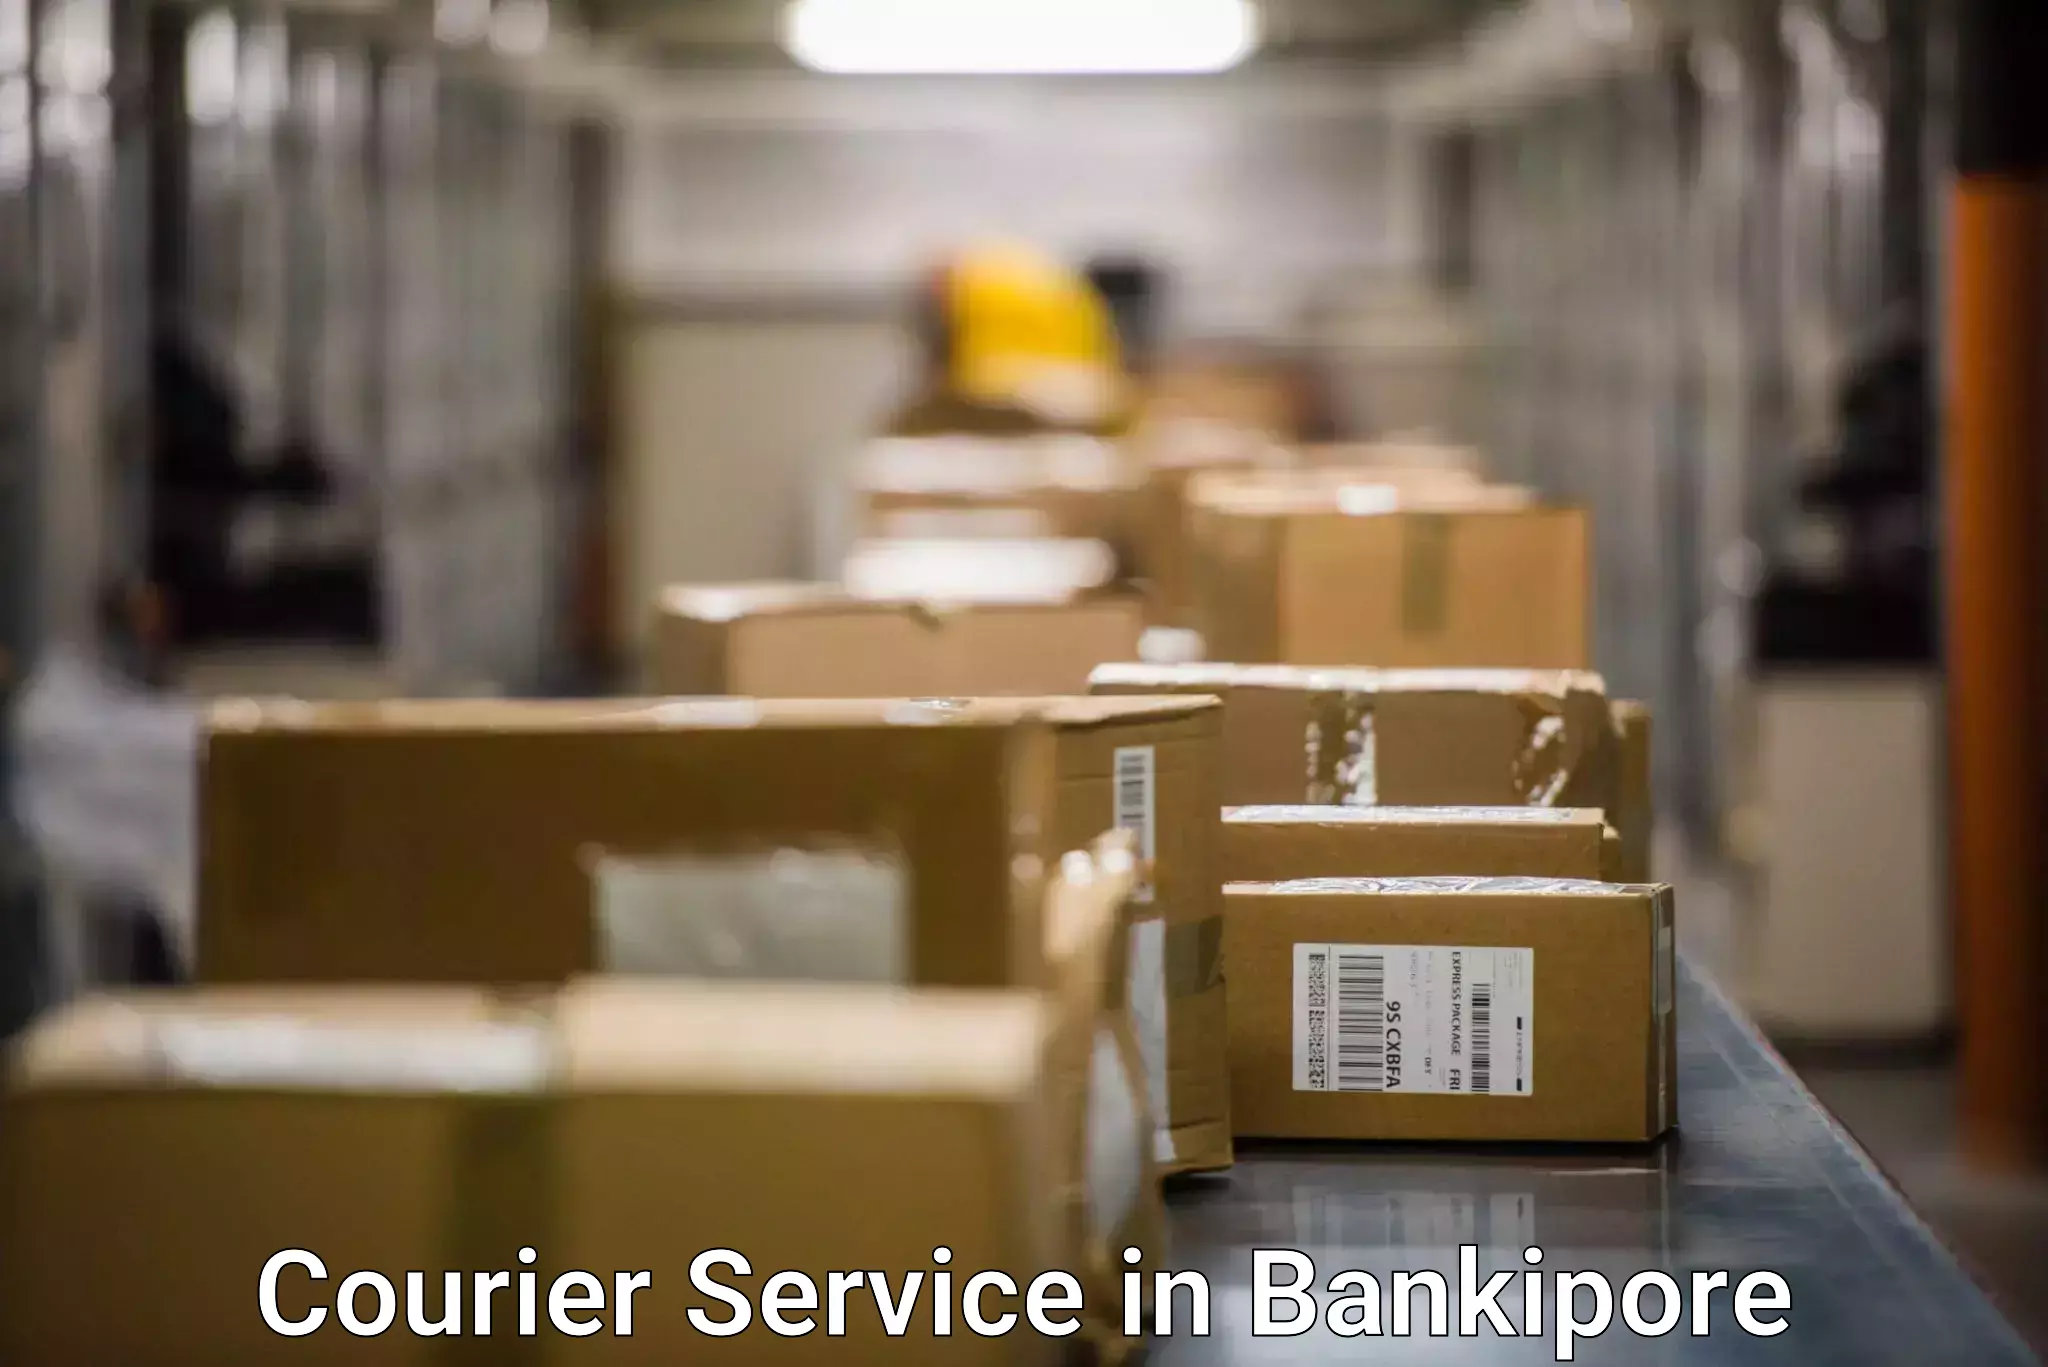 Nationwide courier service in Bankipore